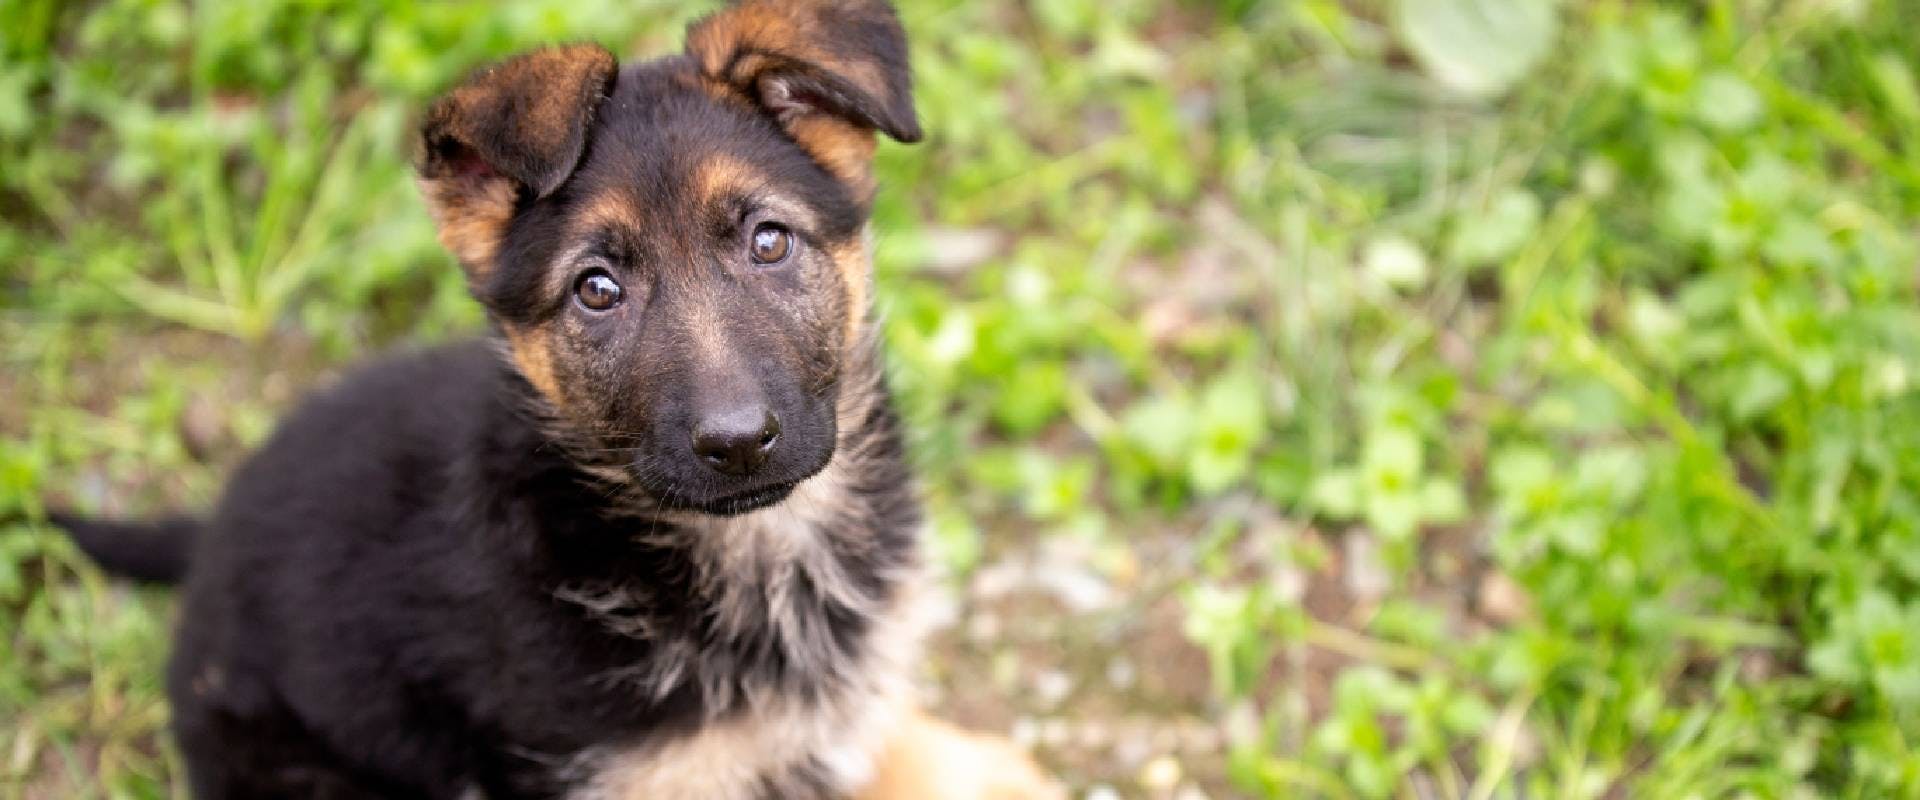 German Shepherd Puppy looking up at the camera